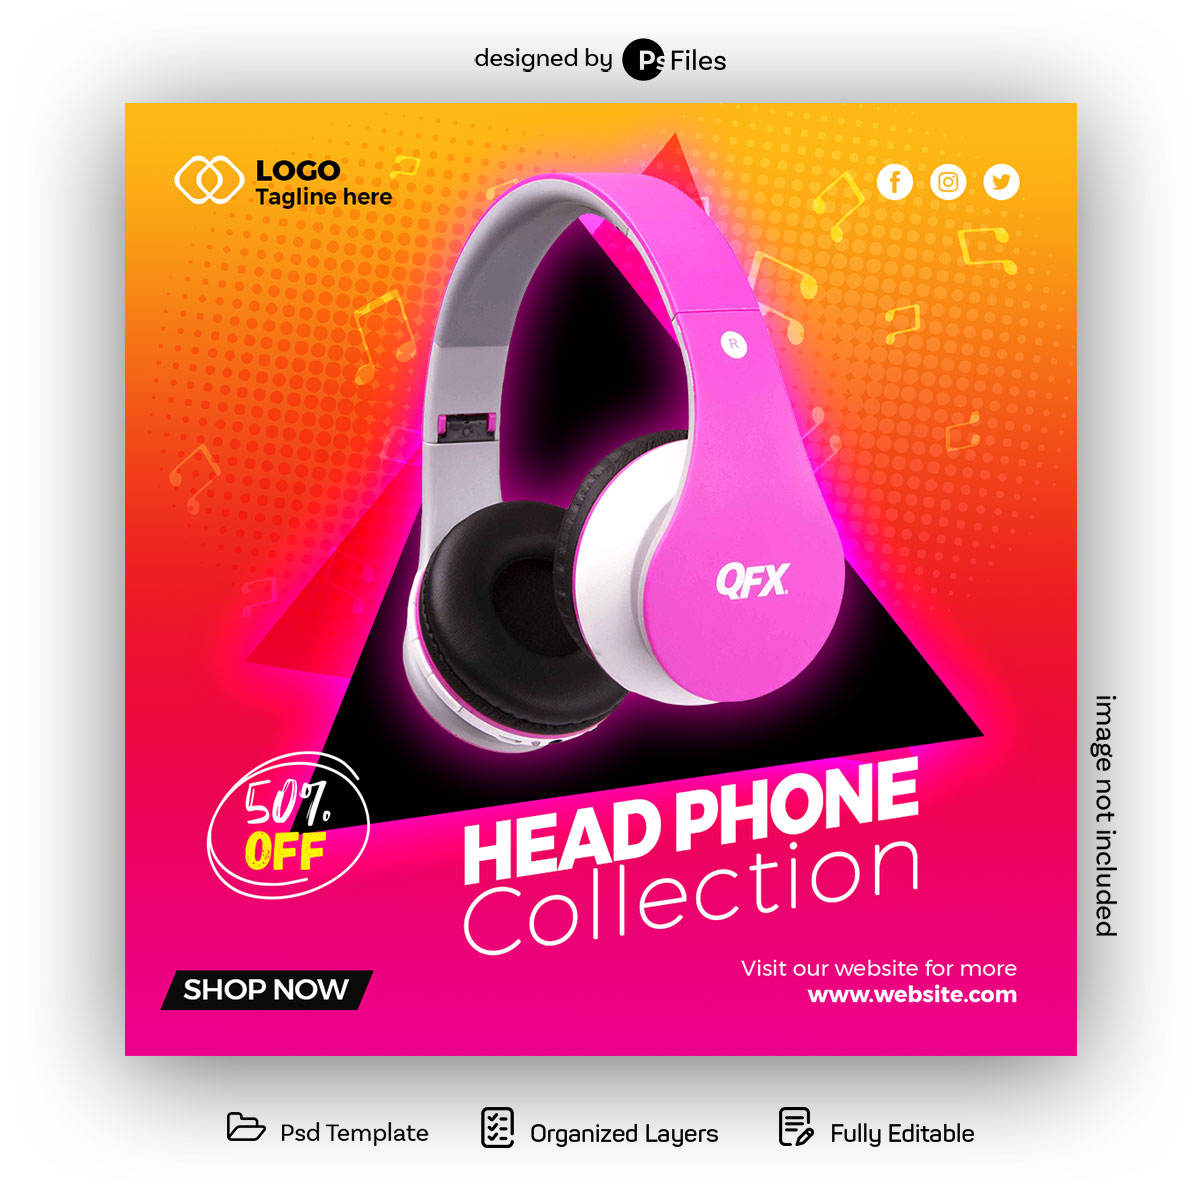 Exclusive Collection Smart Headphone Social Media Banner Design and Instagram Post PSD Template